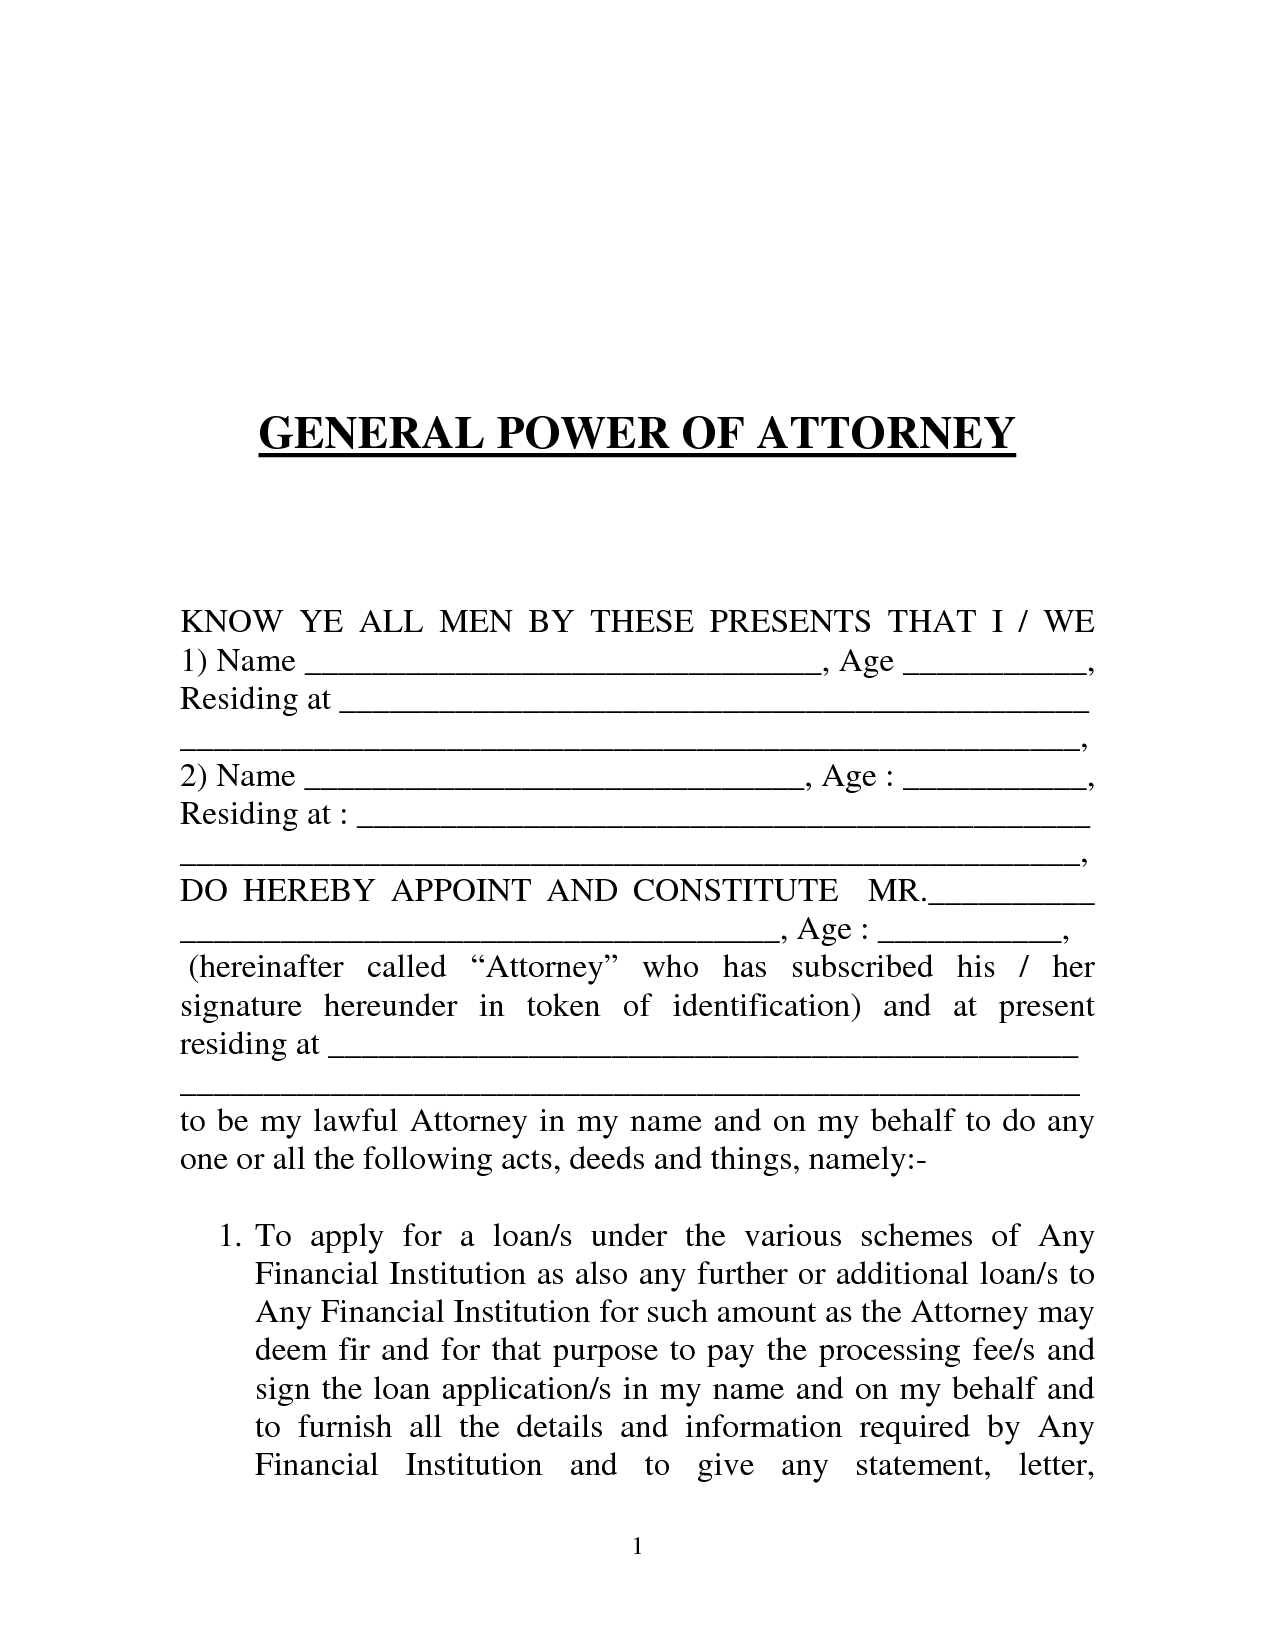 Free Printable Power Of Attorney Form GENERIC 